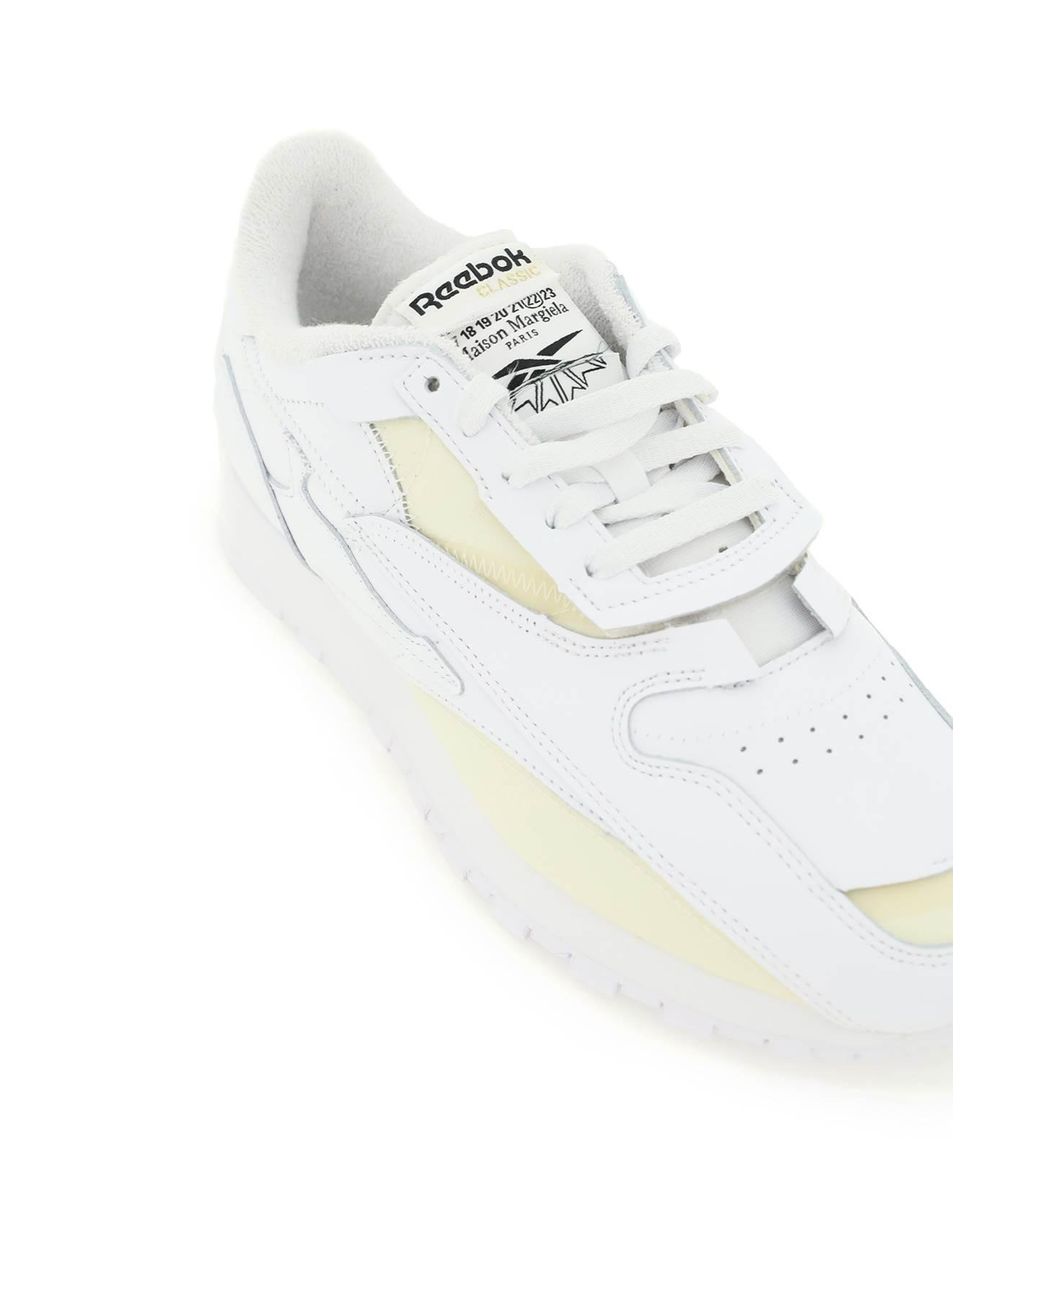 MAISON MARGIELA x REEBOK Project 0 Cl Memory Of V2 Sneakers in White | Lyst